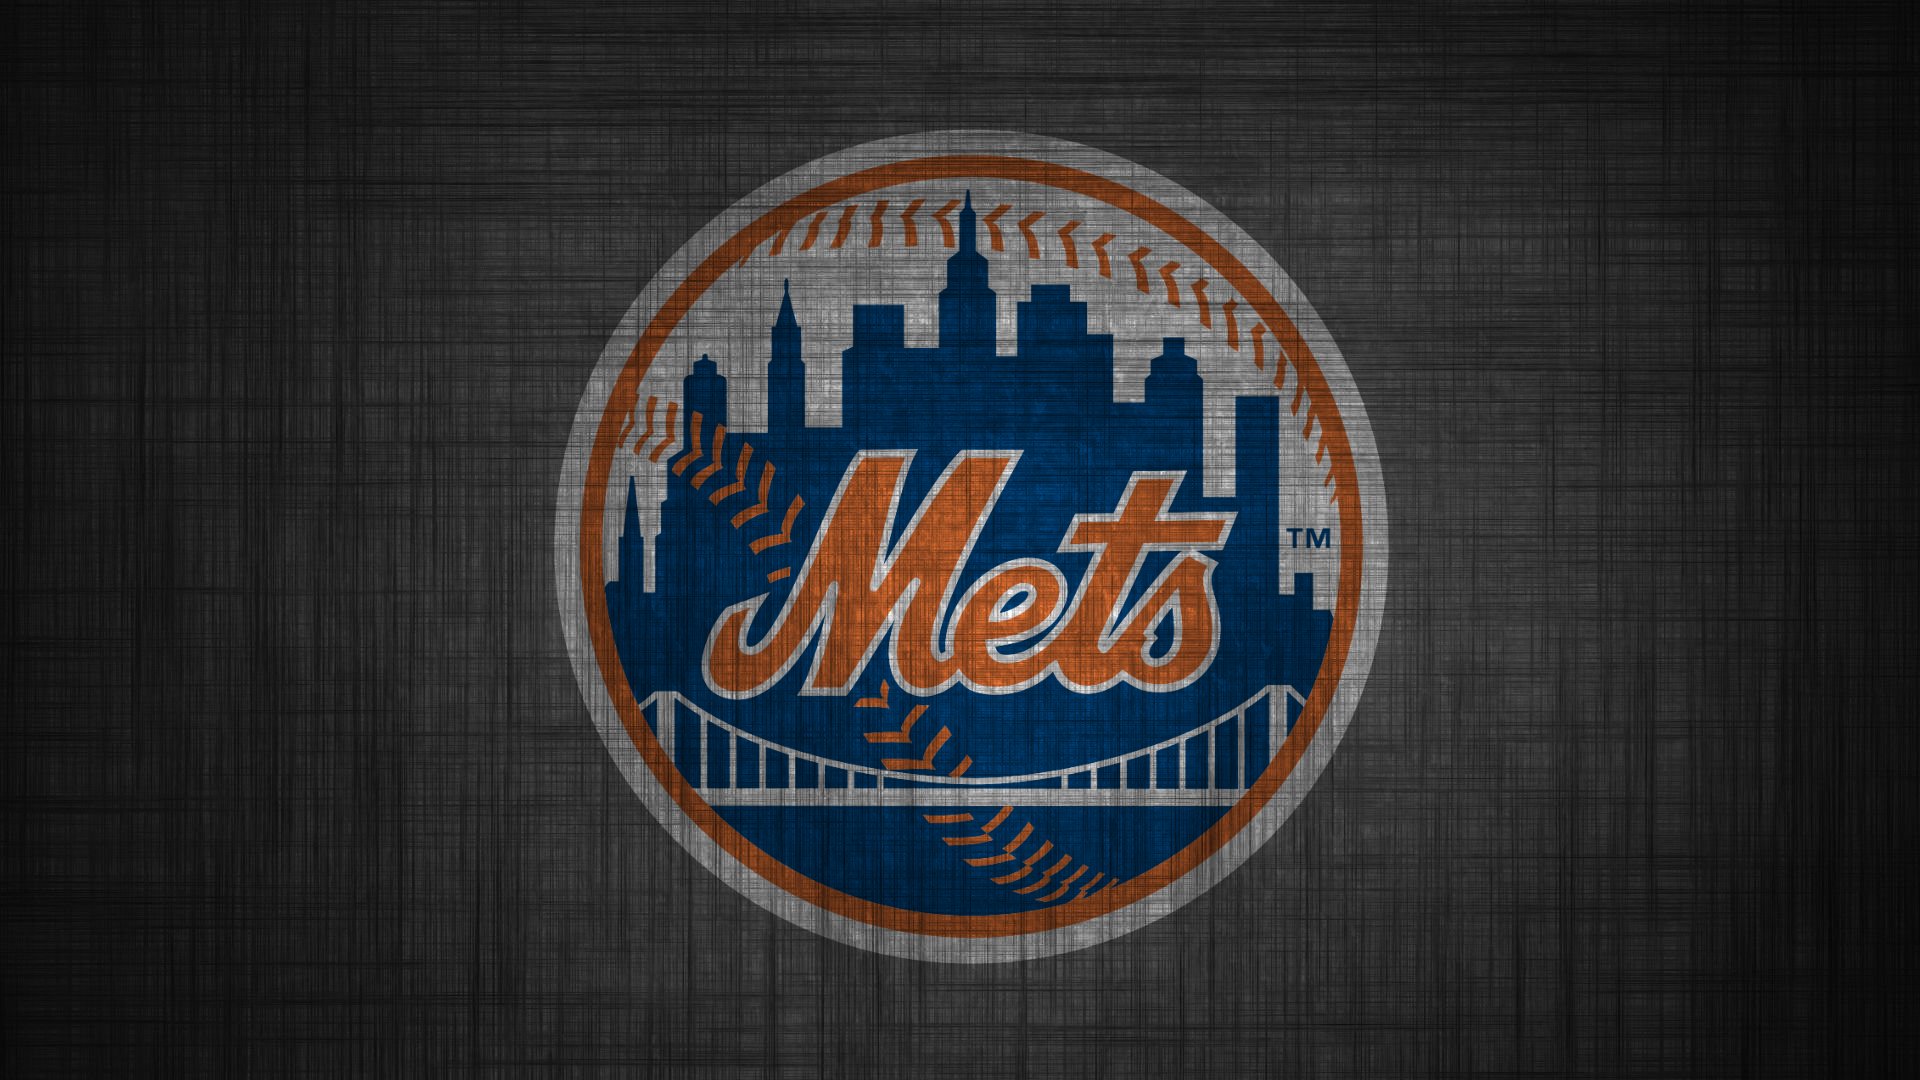 New York Mets wallpapers for desktop, download free New York Mets pictures  and backgrounds for PC